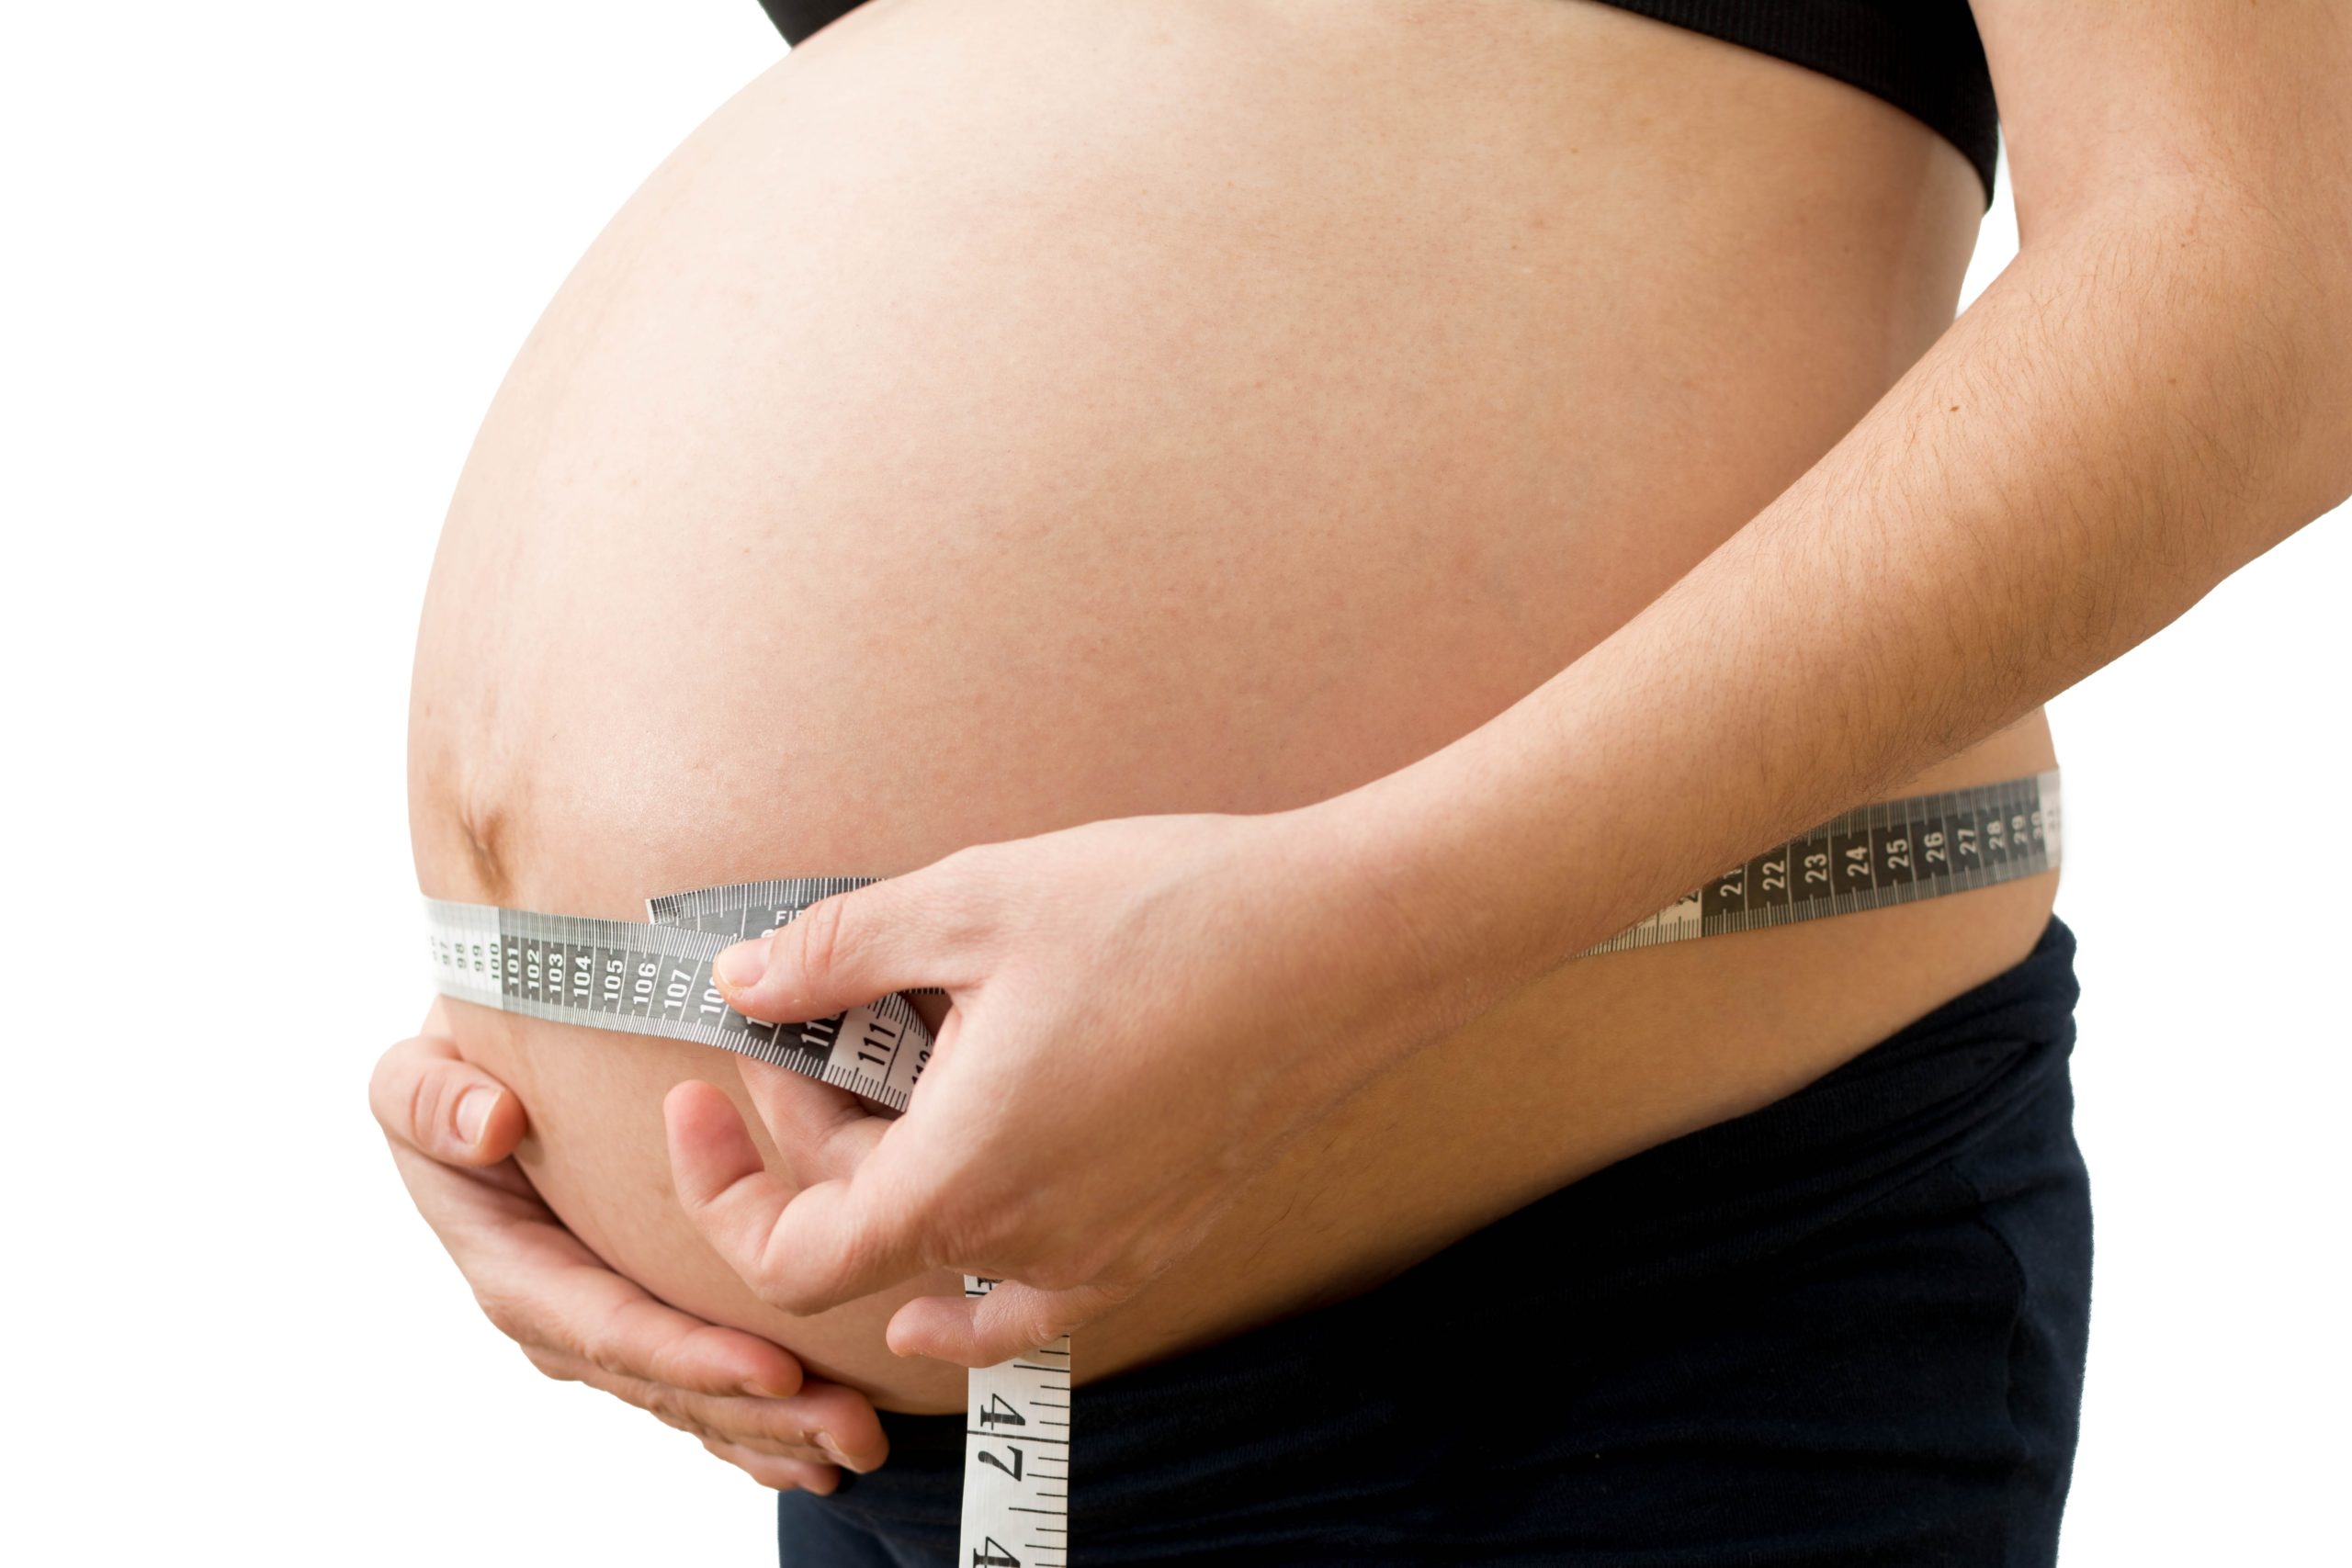 Pregnancy after gastric sleeve not without risk